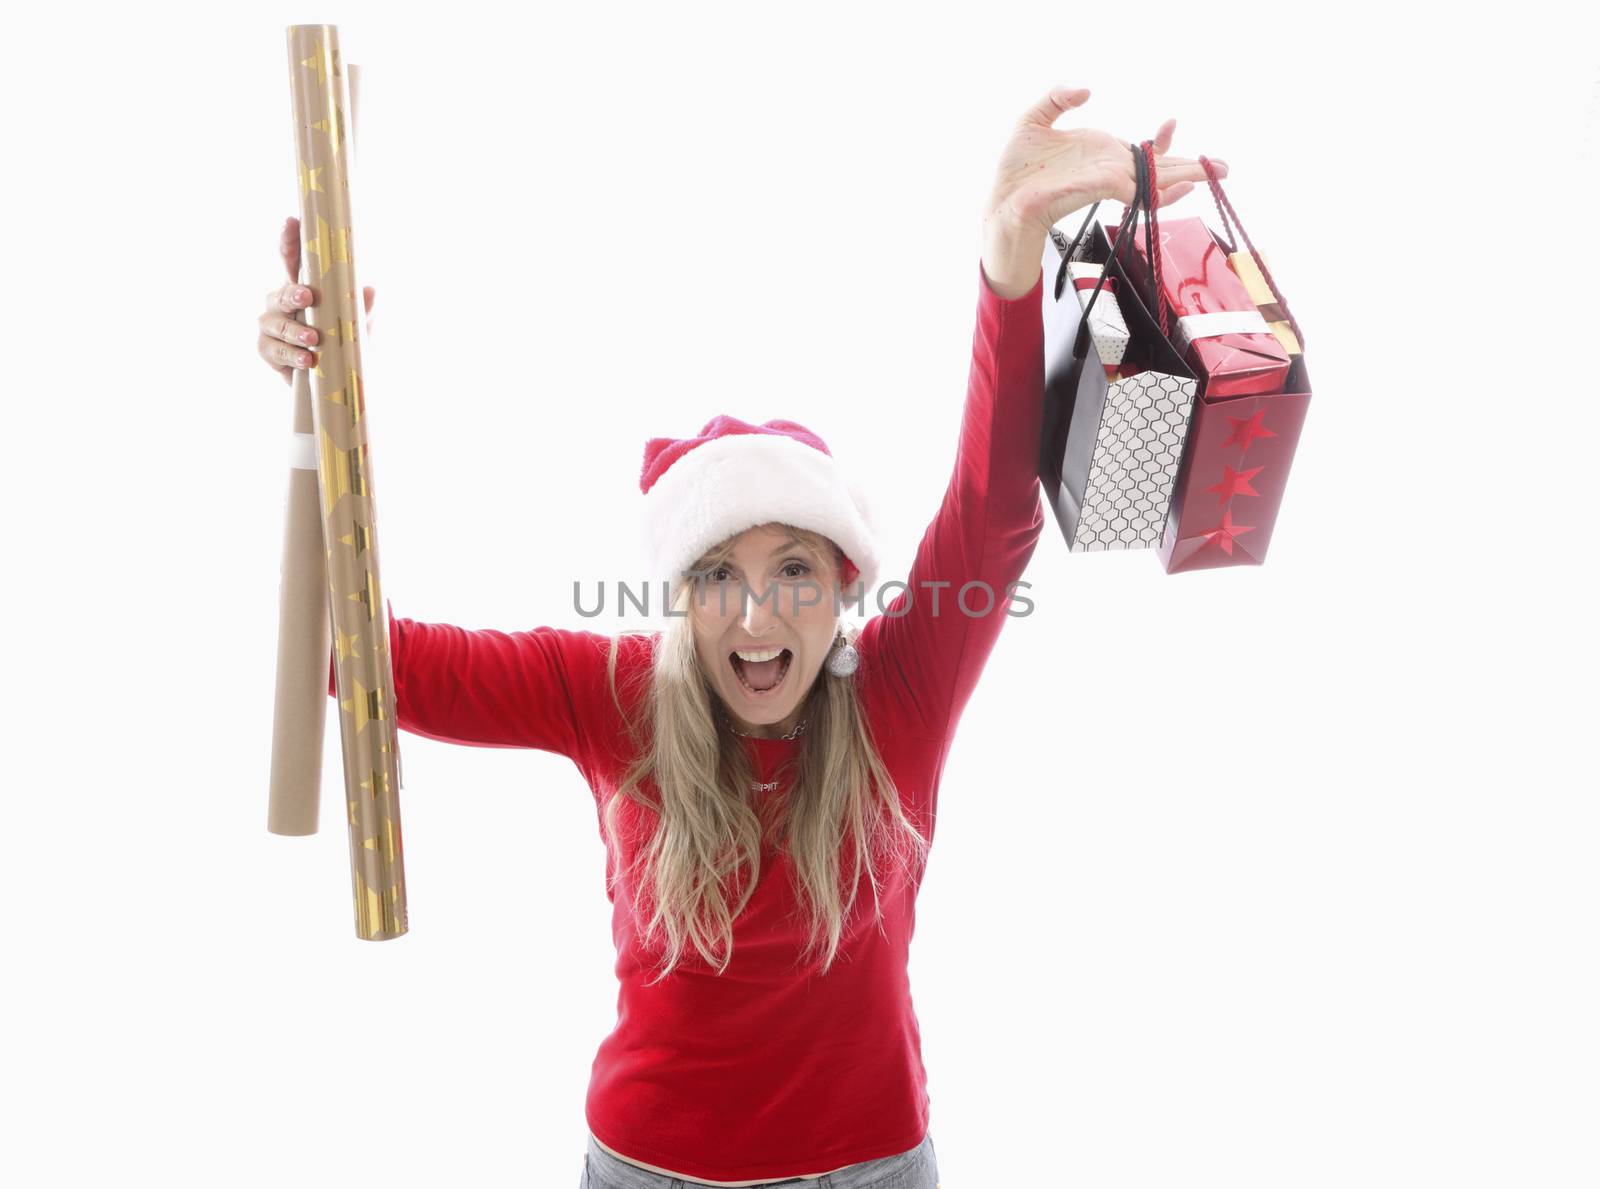 /a woman holding Christmas gifts bought at the shop and gold and kraft wrapping paper